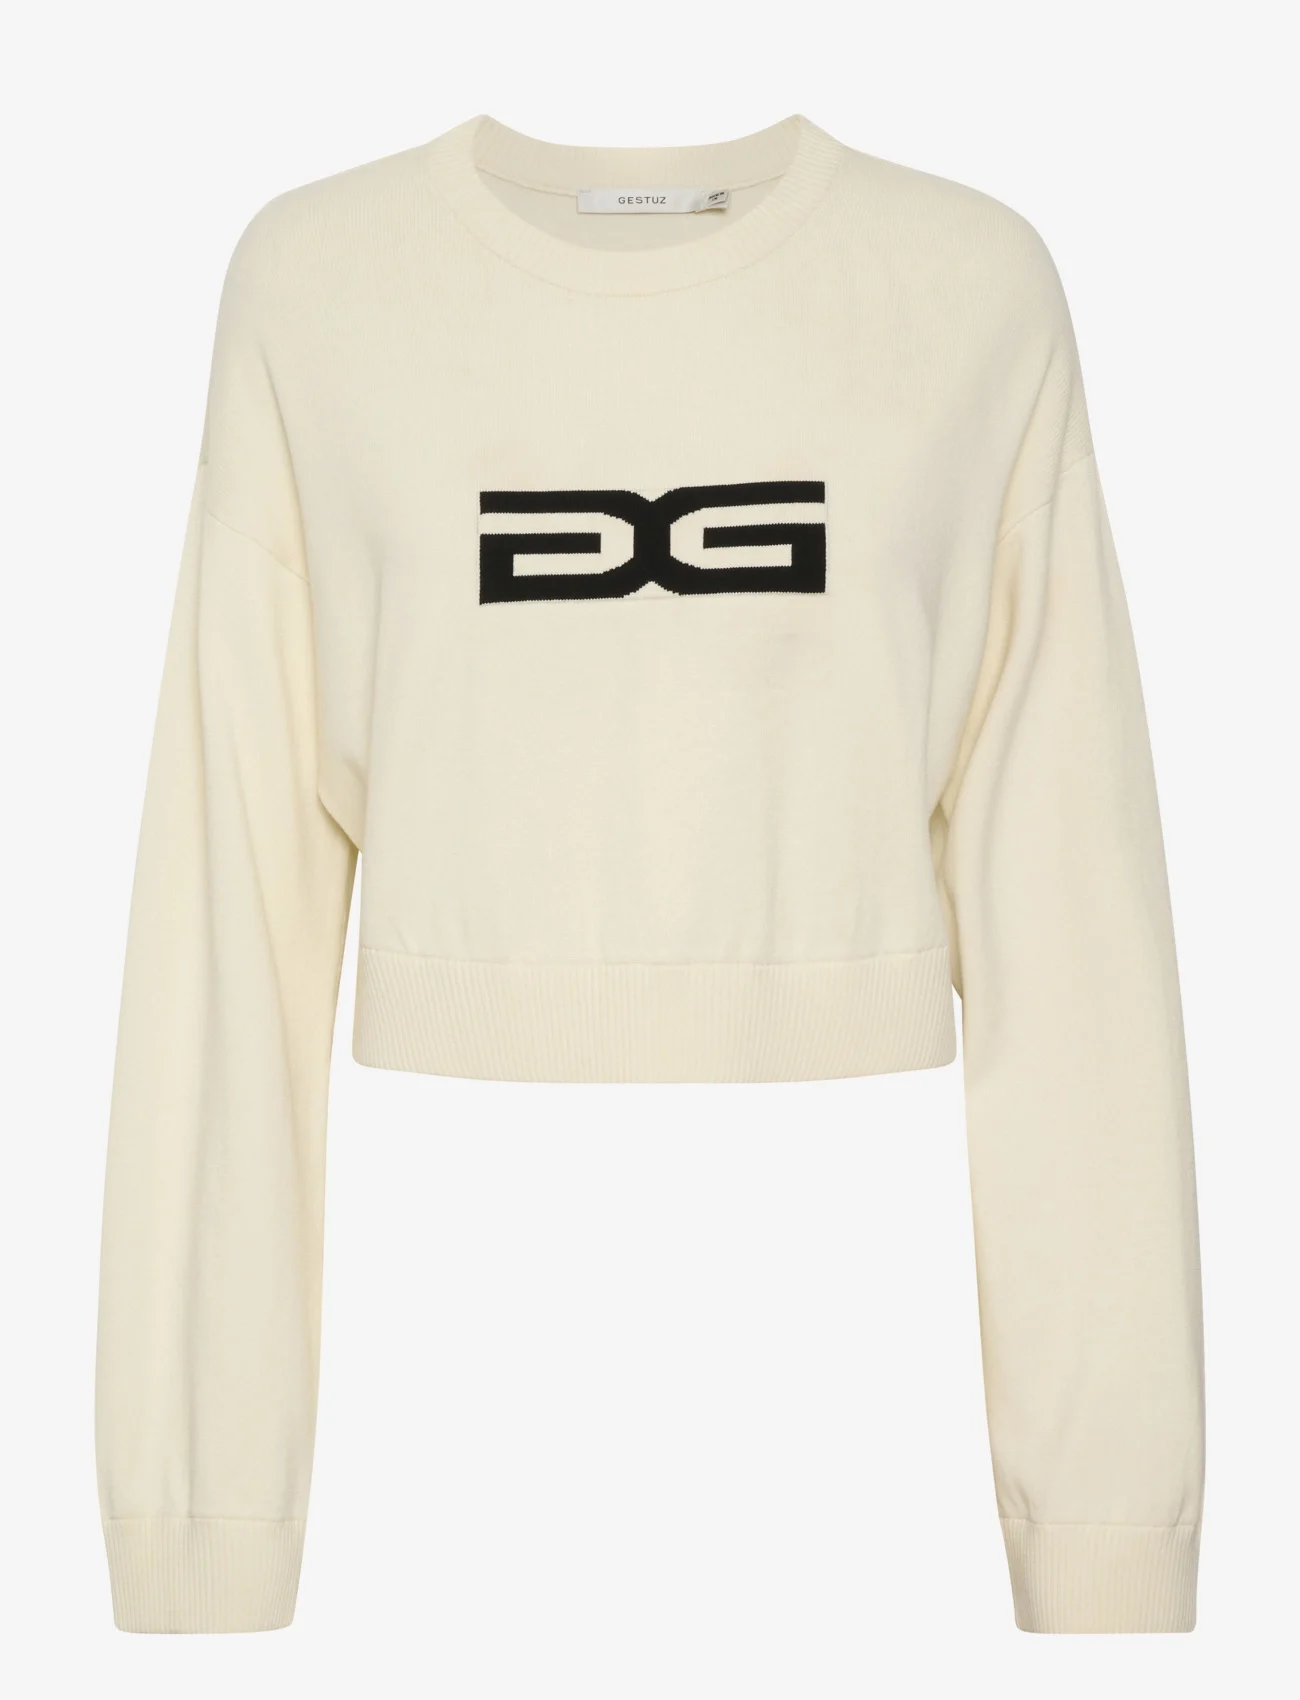 Gestuz - AyaGZ cropped pullover - pullover - egret - 0